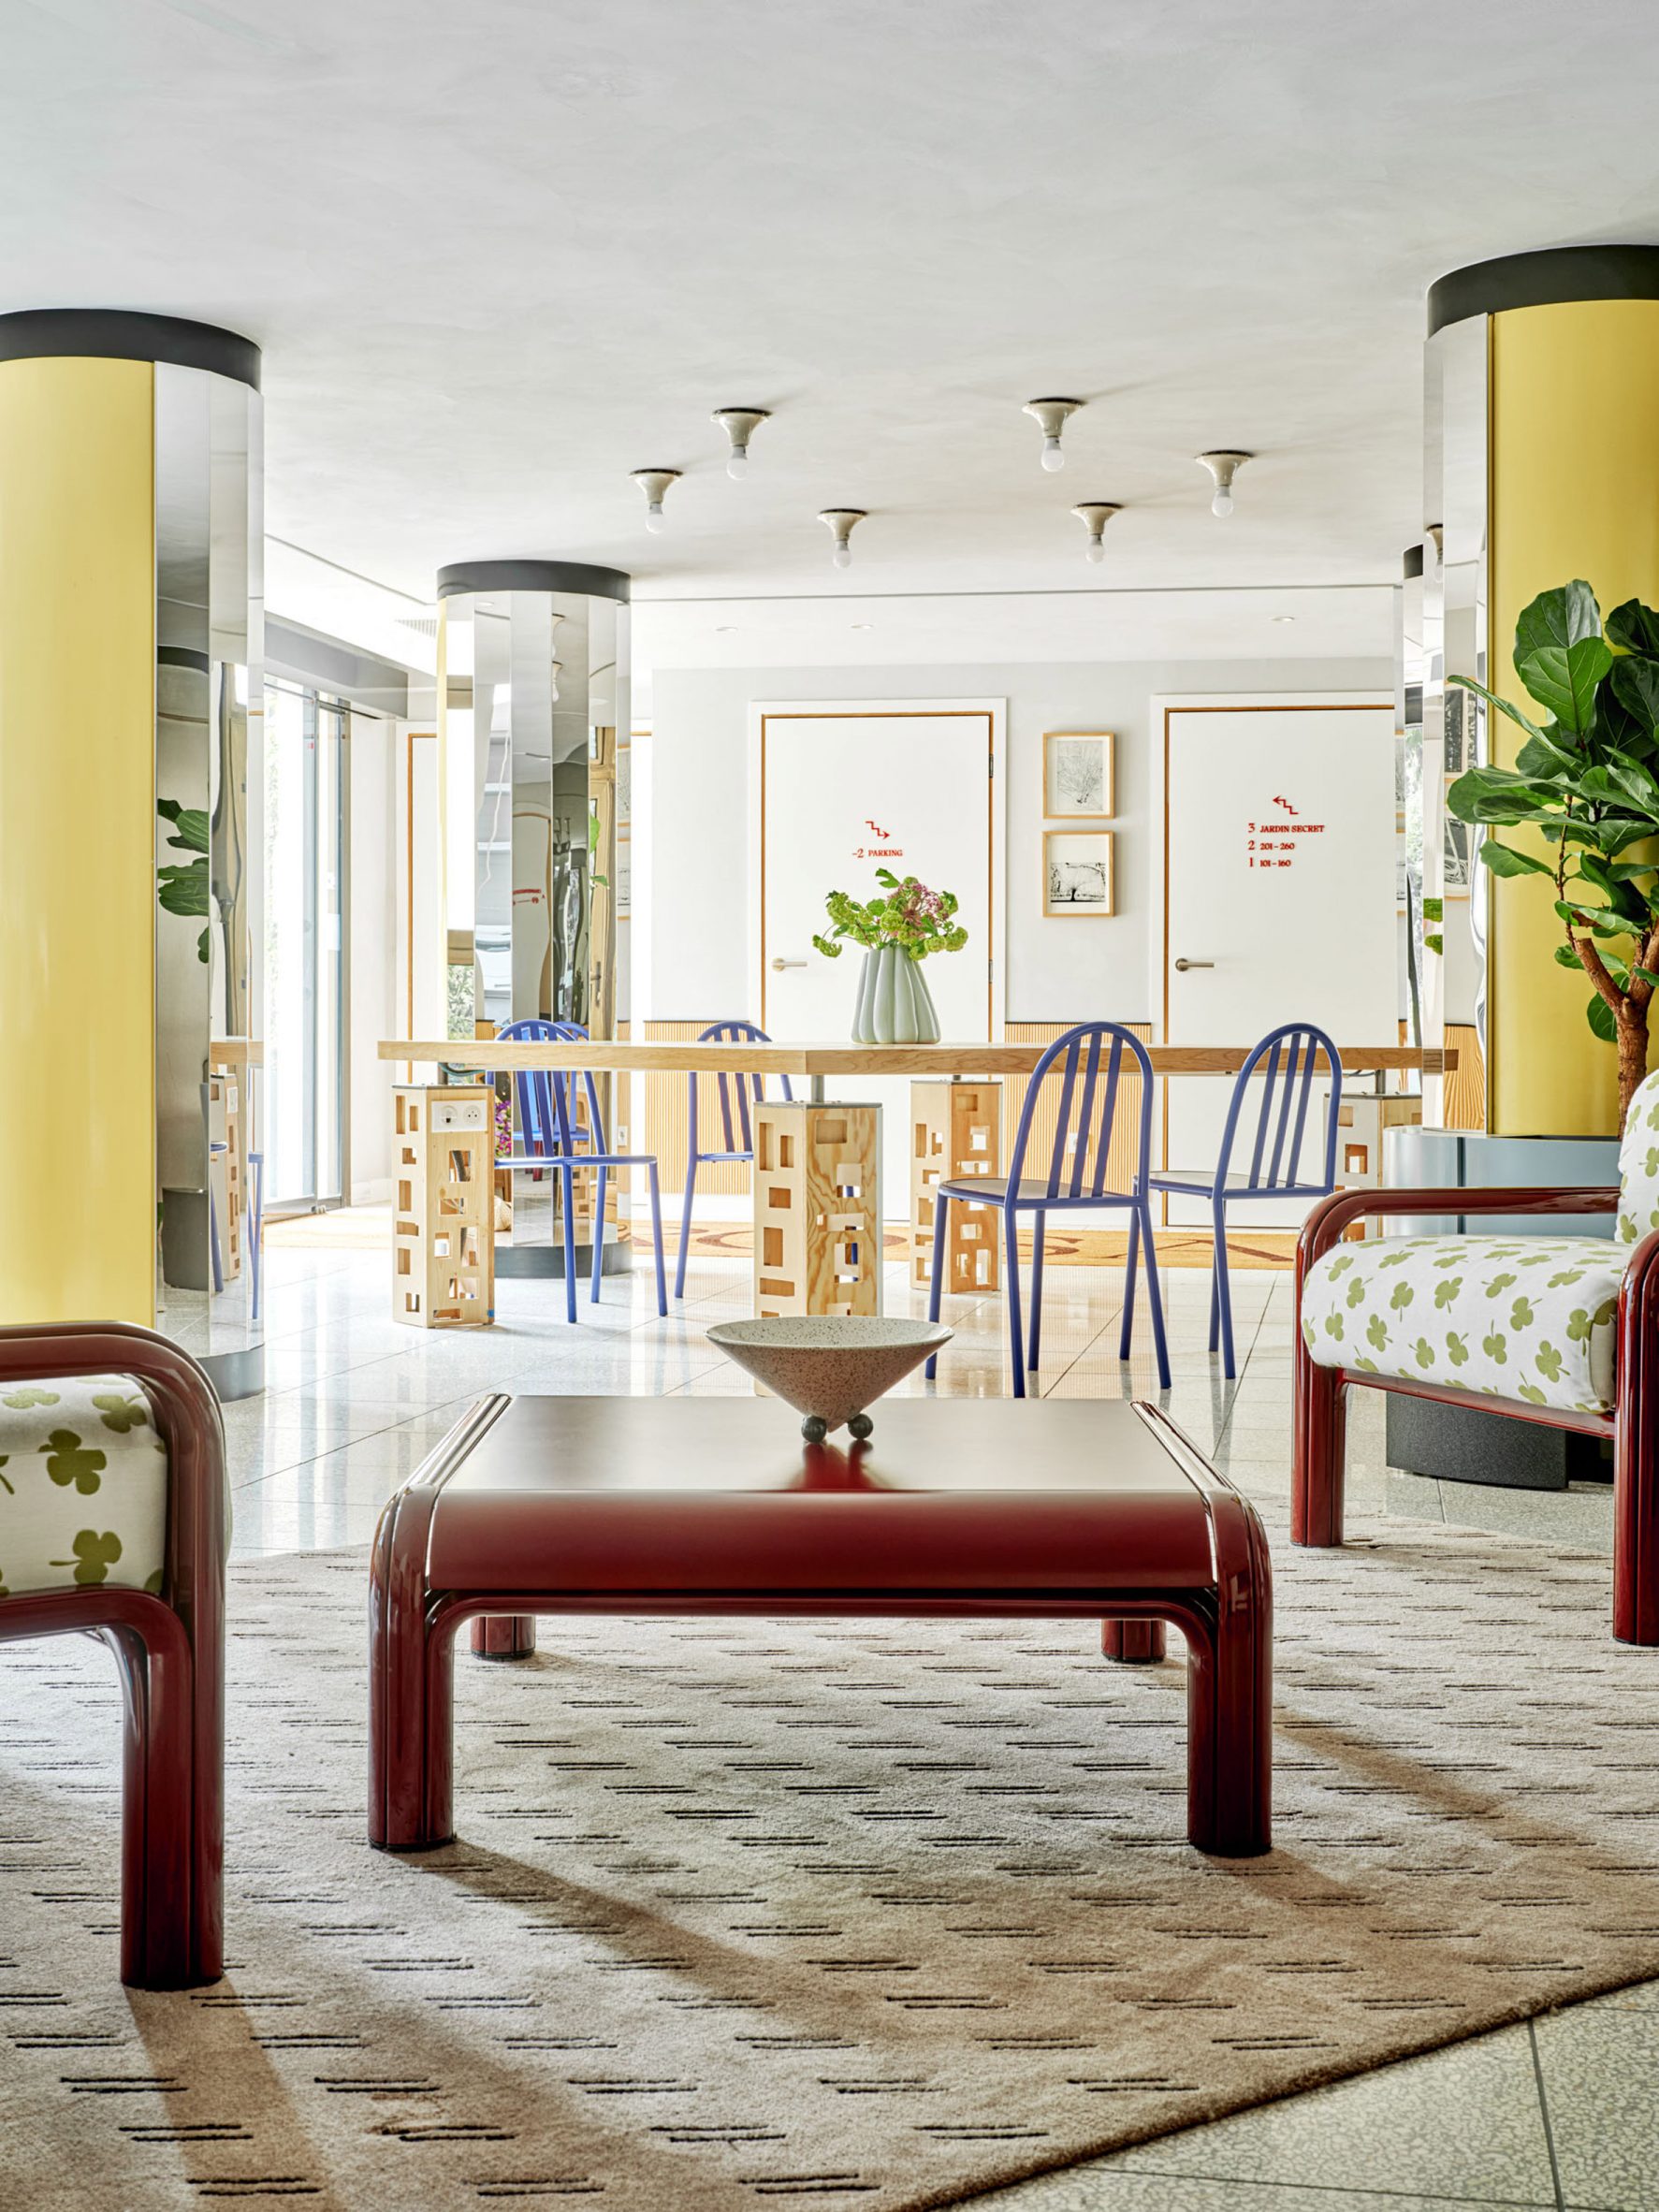 Yellow mirrored columns in hotel lobby with pre-owned chairs and plants